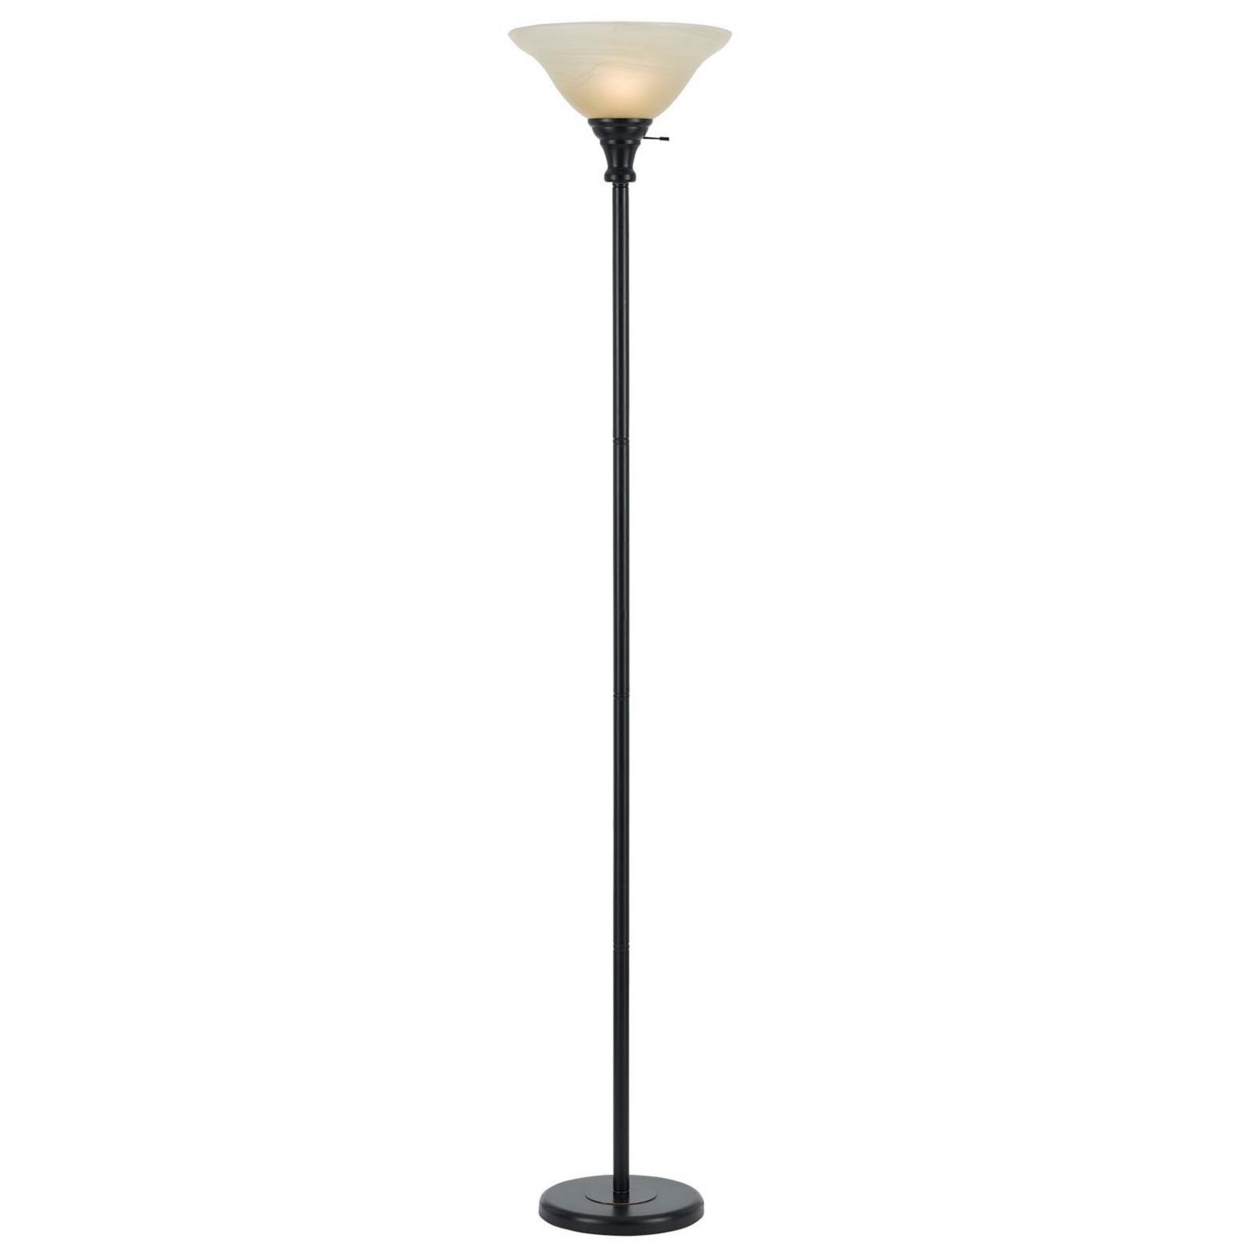 Metal Round 3 Way Torchiere Lamp With Frosted Shade, Dark Bronze And Gold- Saltoro Sherpi